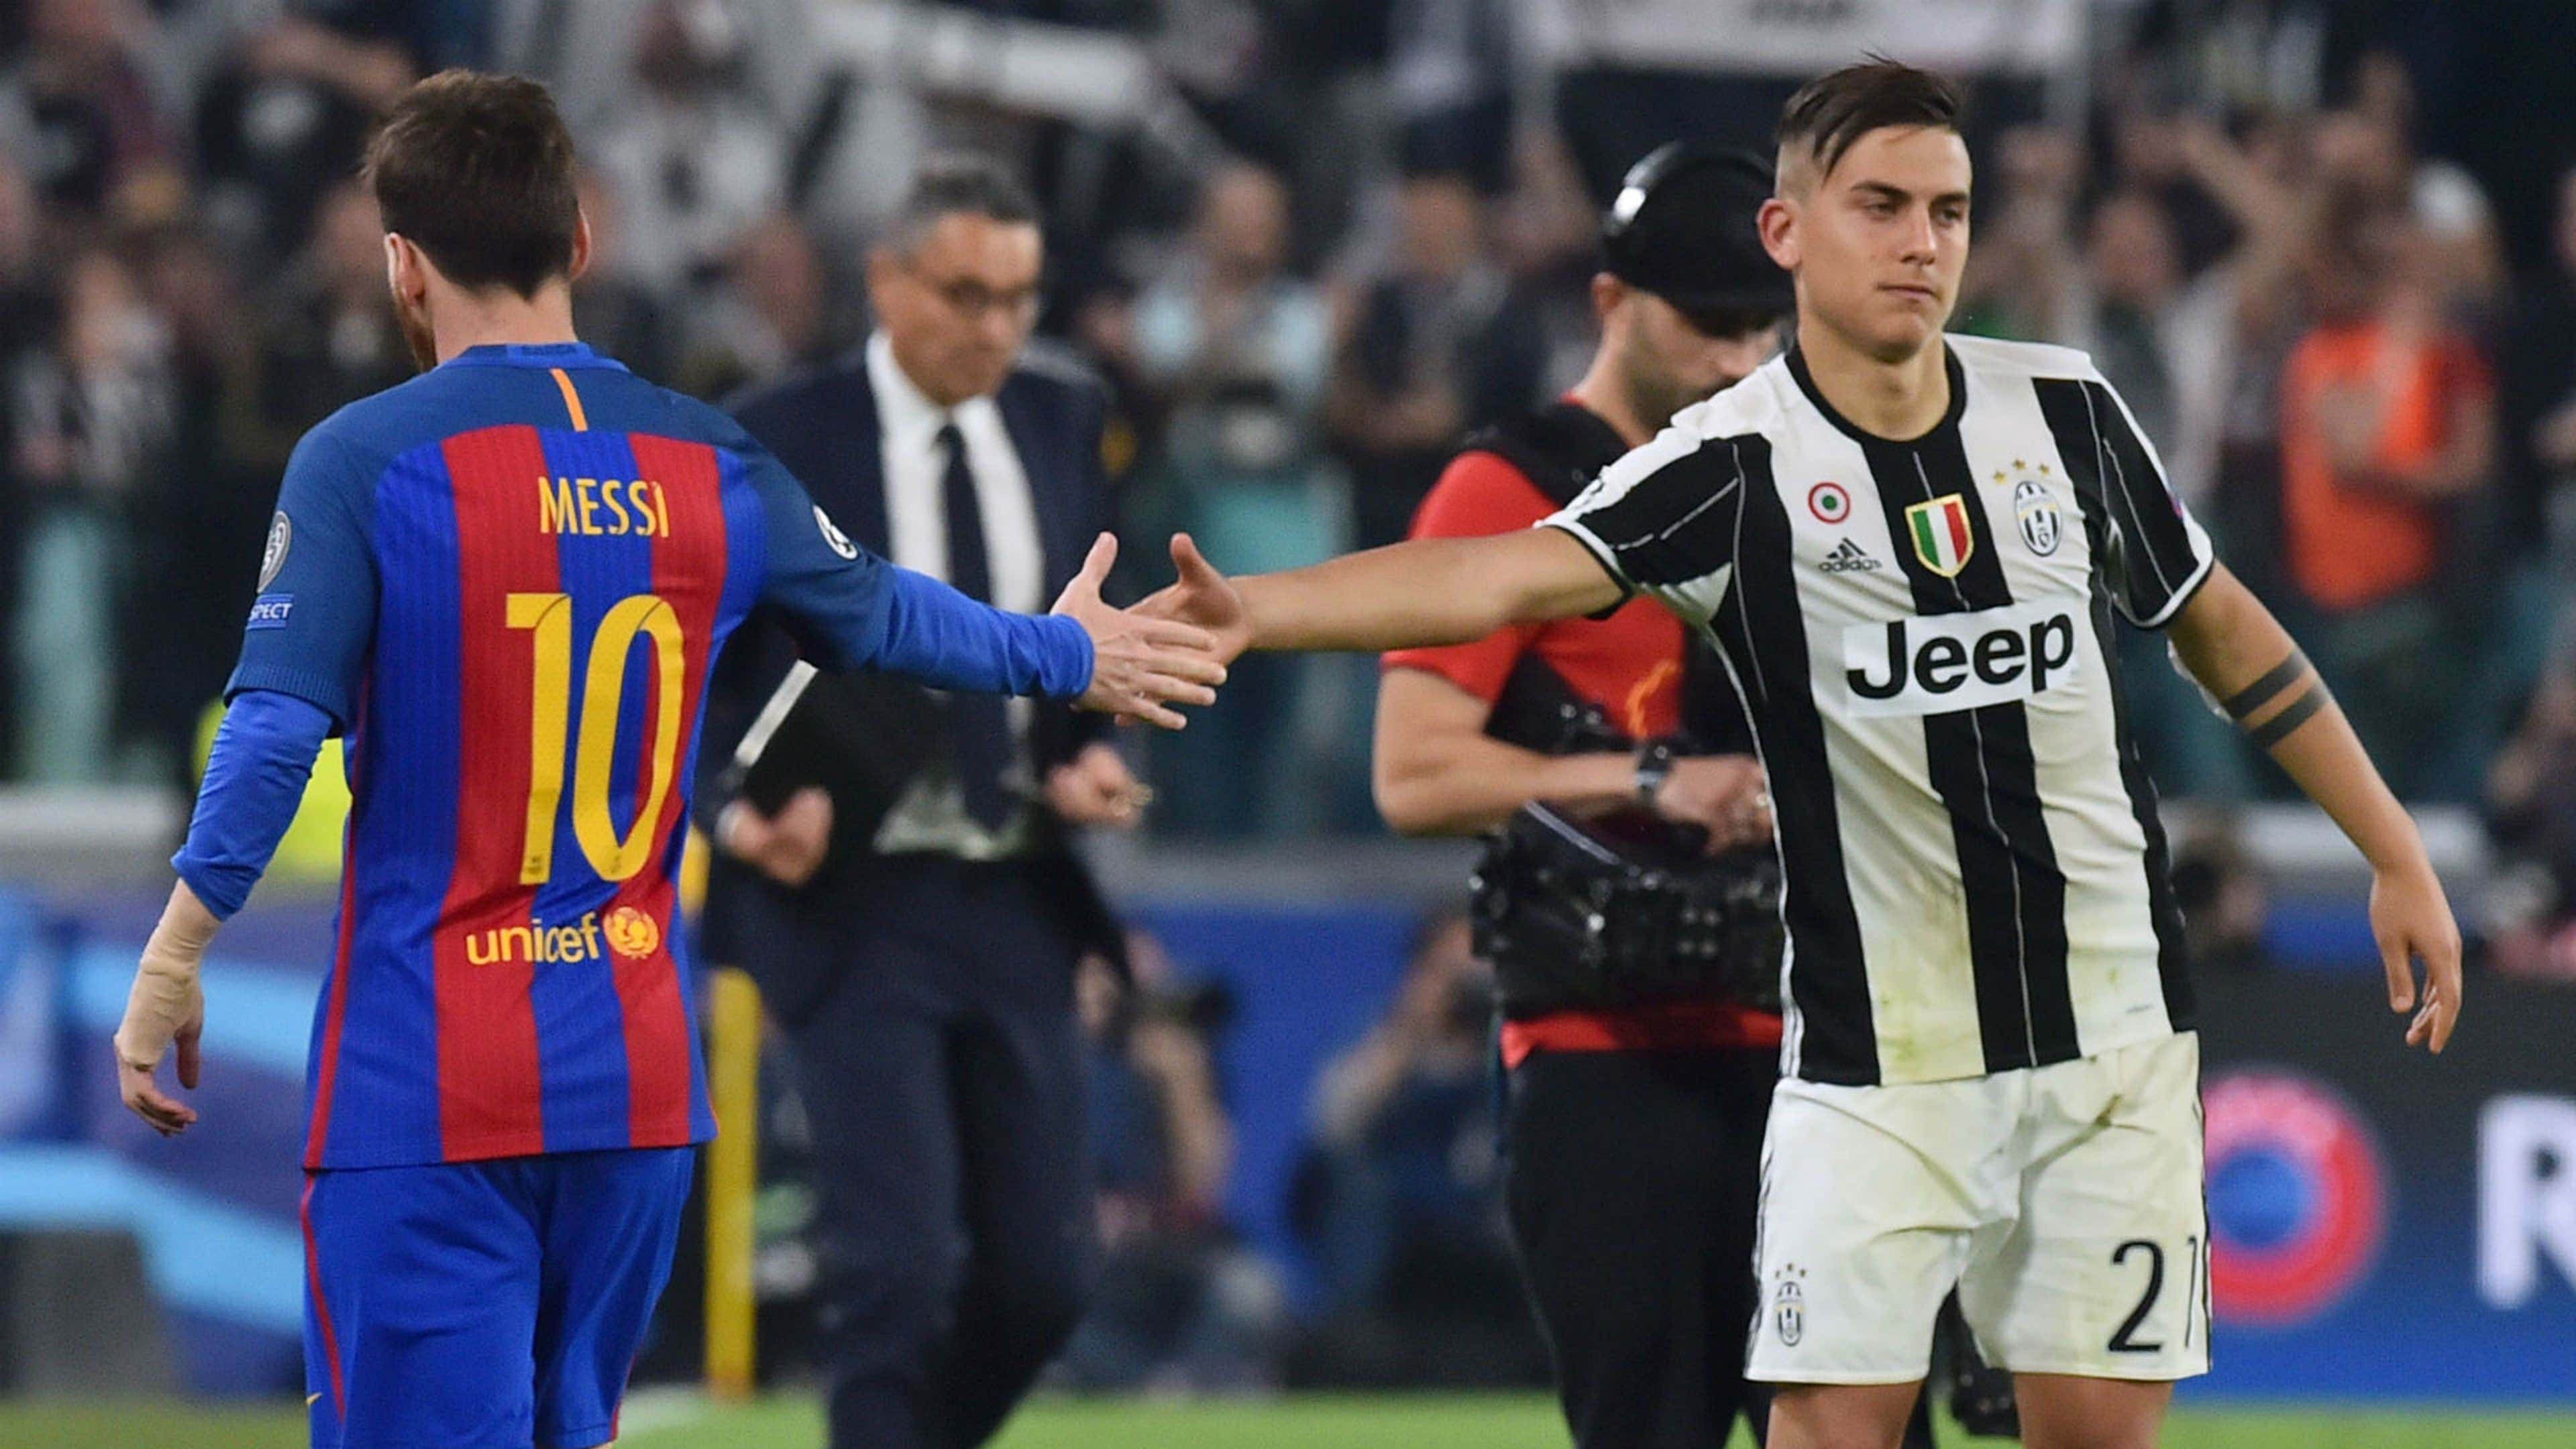 Everyone wants Messi & Dybala to play together - but can the two  left-footed geniuses co-exist in the same team? | Goal.com US